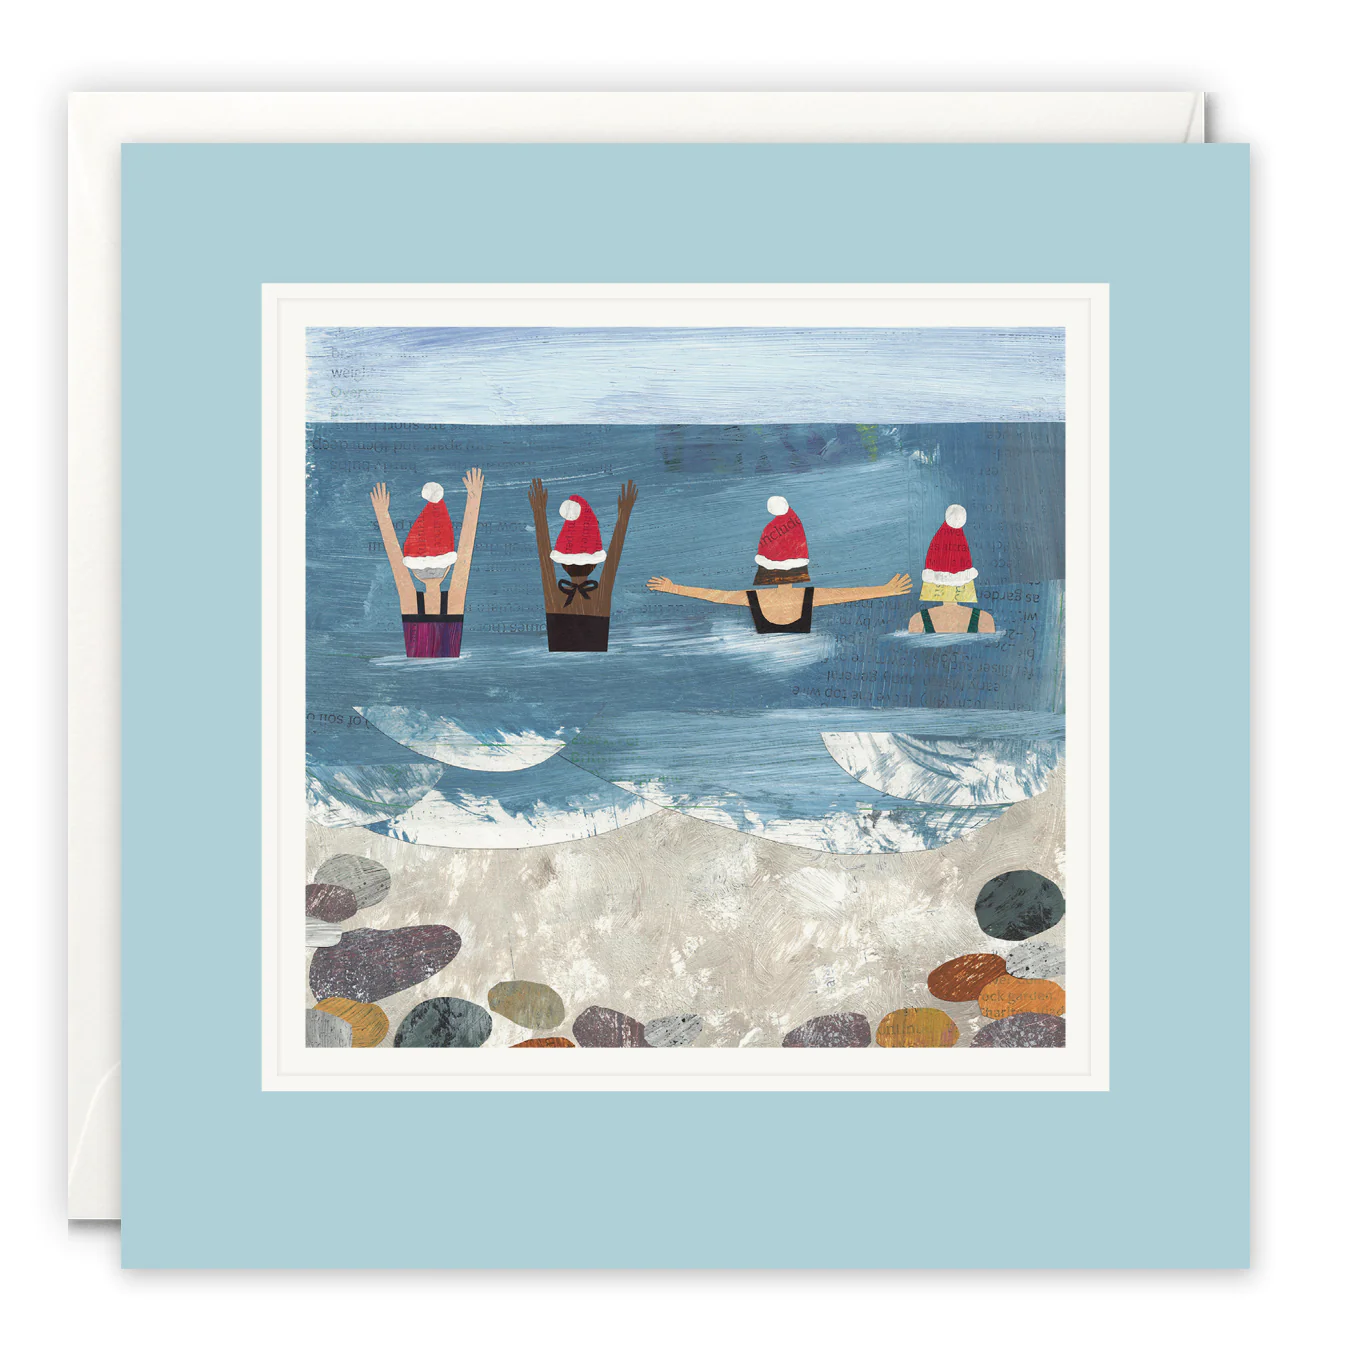 women in the sea at xmas card